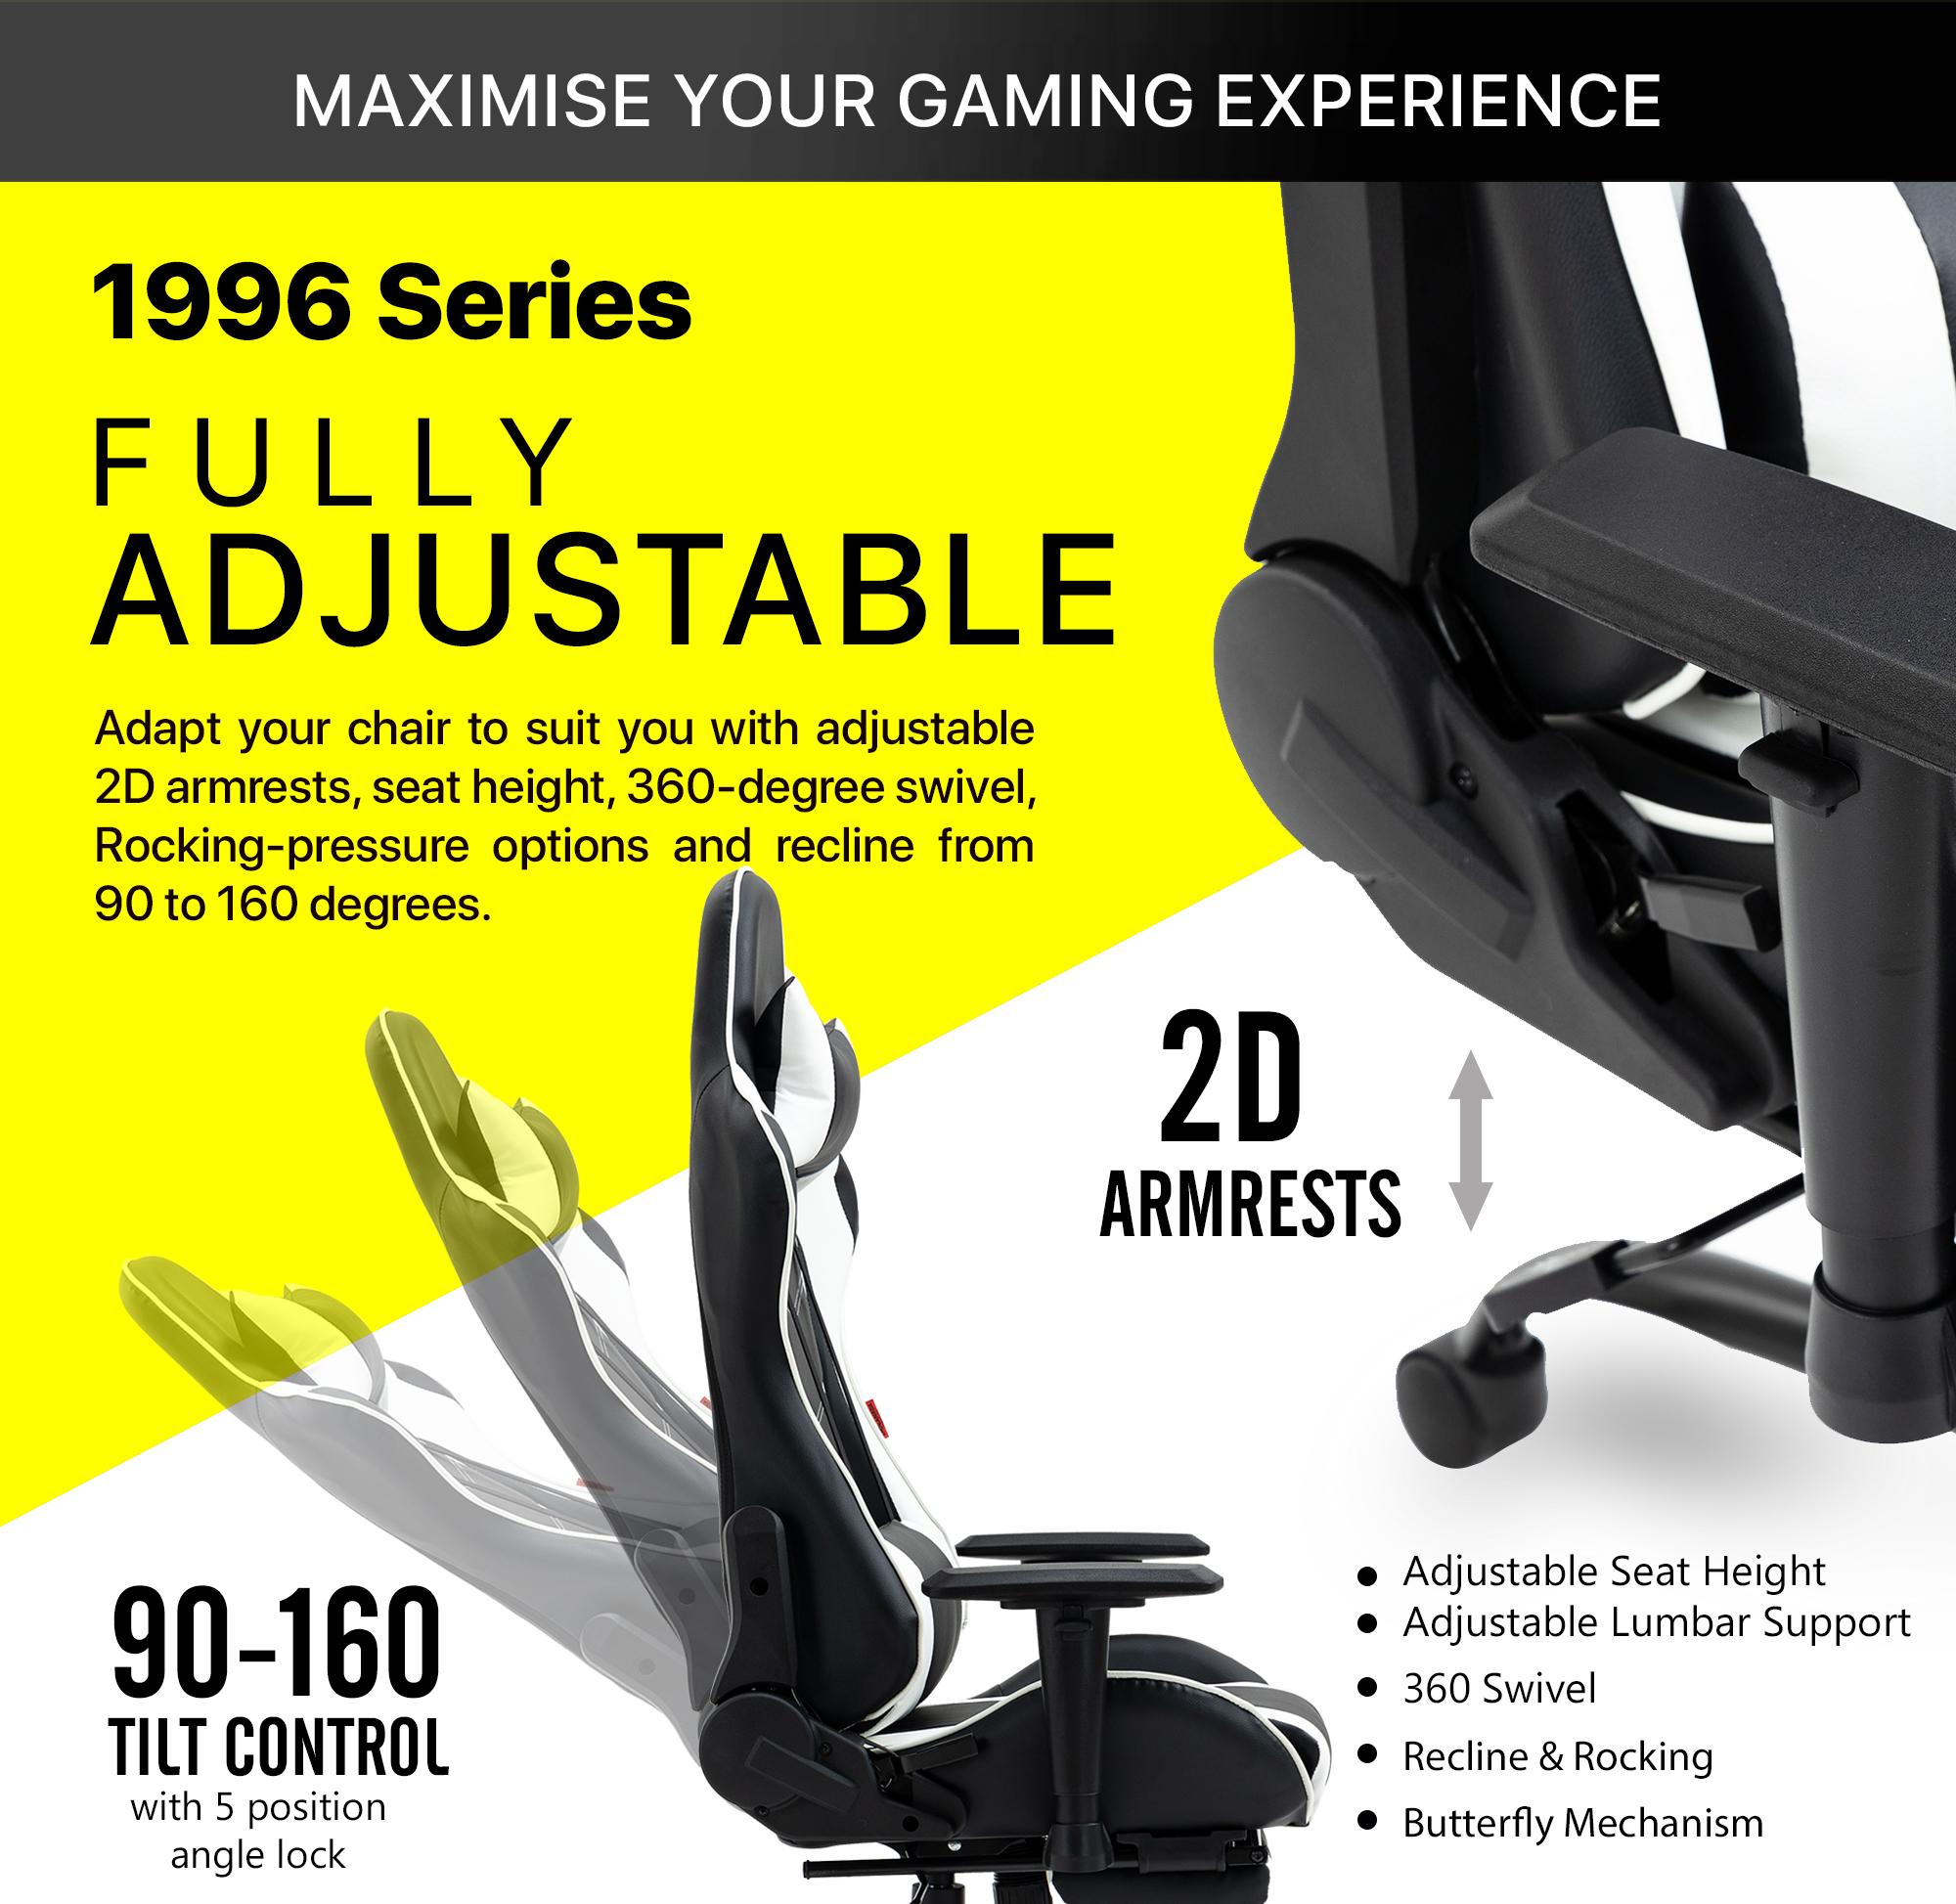 The backrest can be positioned at any angle from 90-160 degree reclining for work, gaming, studying